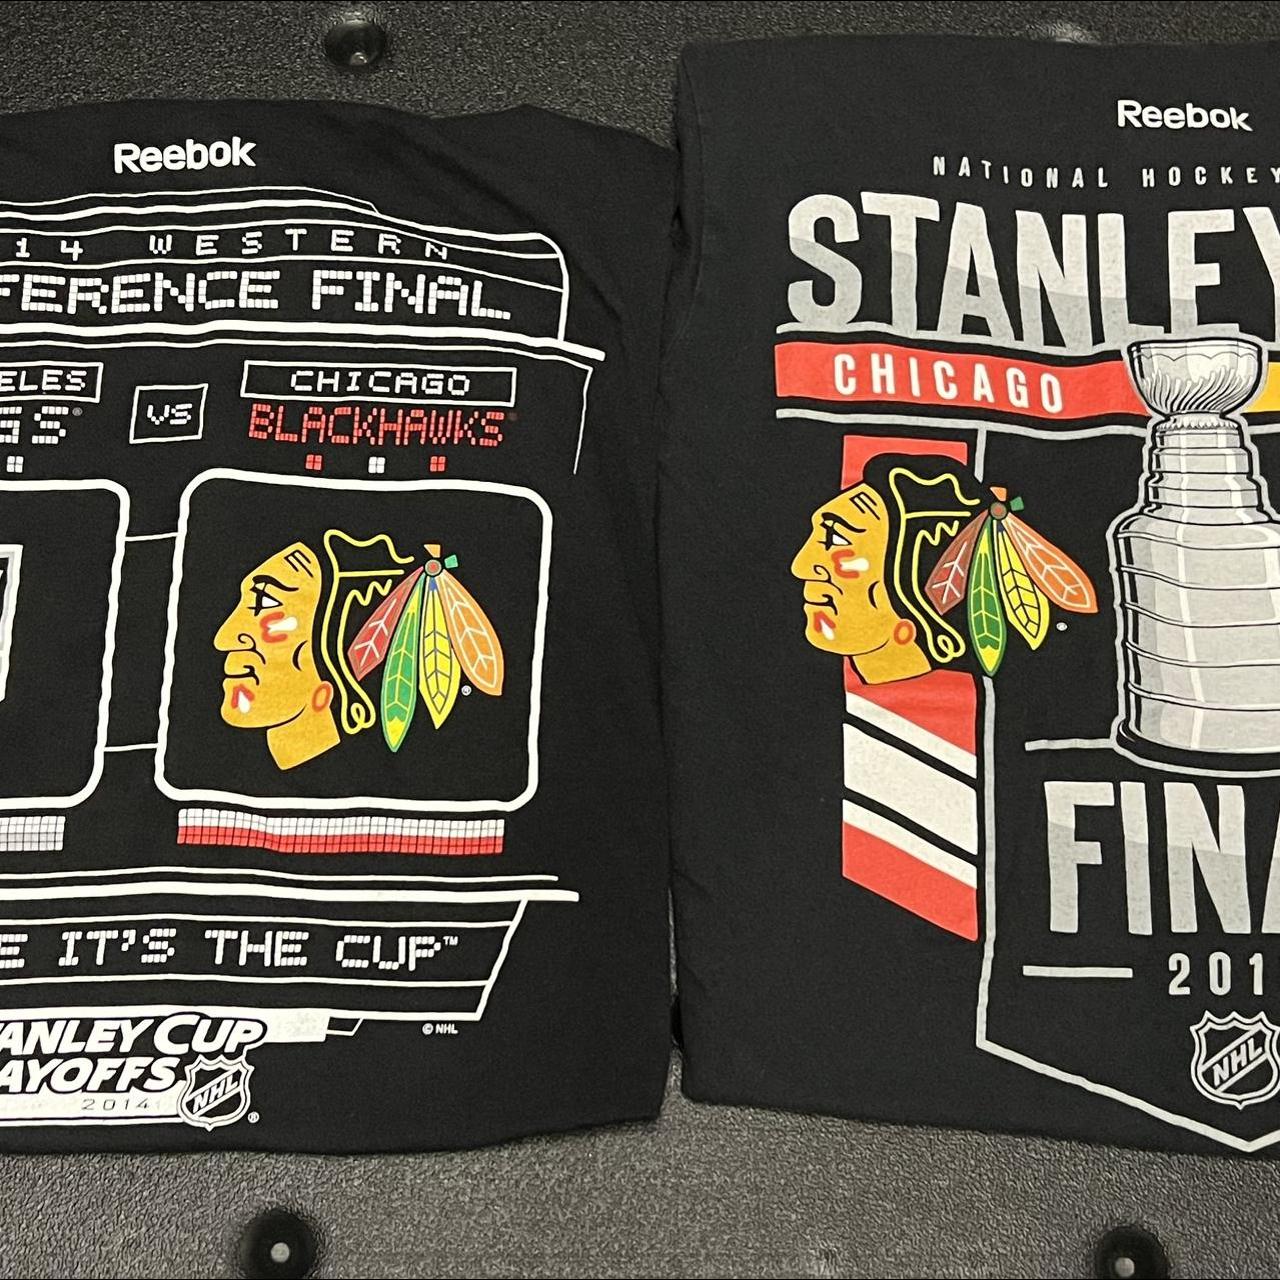 Chicago Blackhawks 2015 Stanley Cup Champions Old - Depop